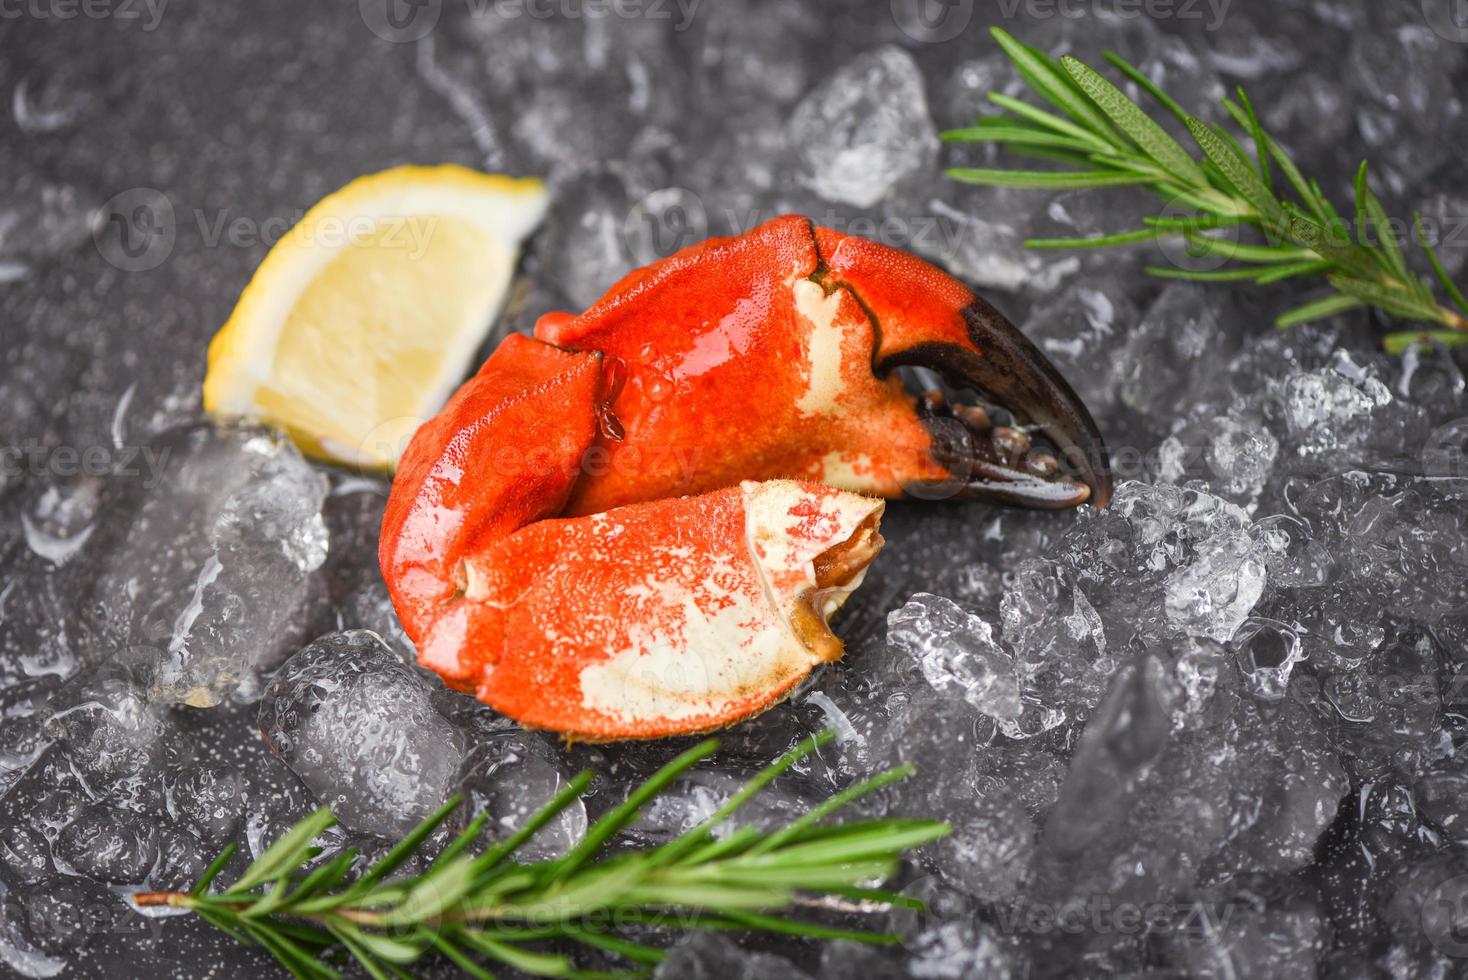 Seafood frozen boiled crab claws - Fresh crab with ingredients lemon rosemary on ice at market photo